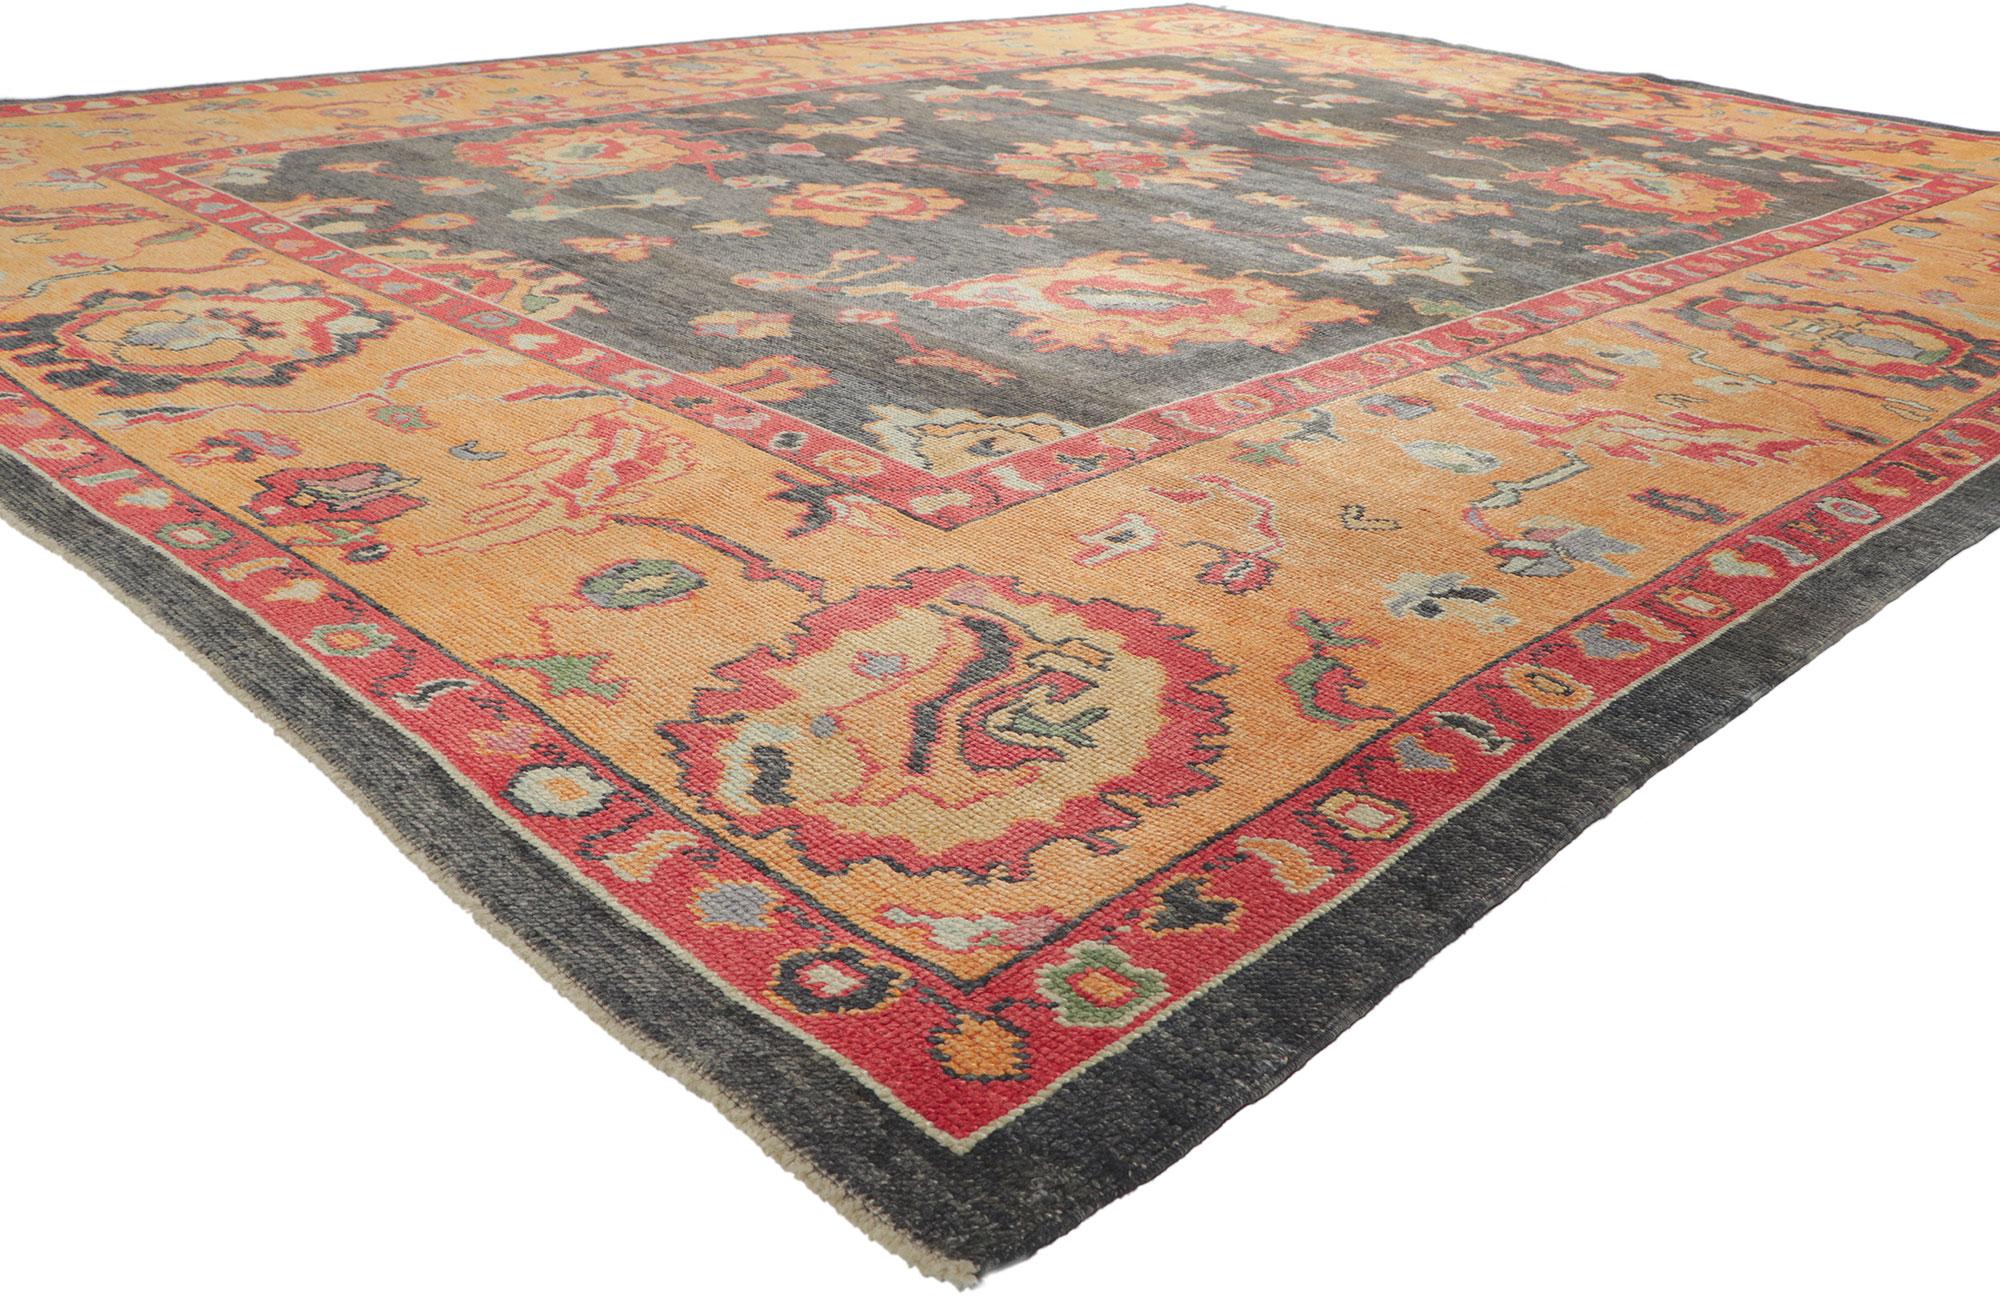 52430 New Colorful Turkish Oushak Rug, 10'03 x 13'00. Showcasing a bold expressive design with incredible detail and texture, this hand knotted wool Turkish Oushak rug is a captivating vision of woven beauty. The allover pattern and lively colorway